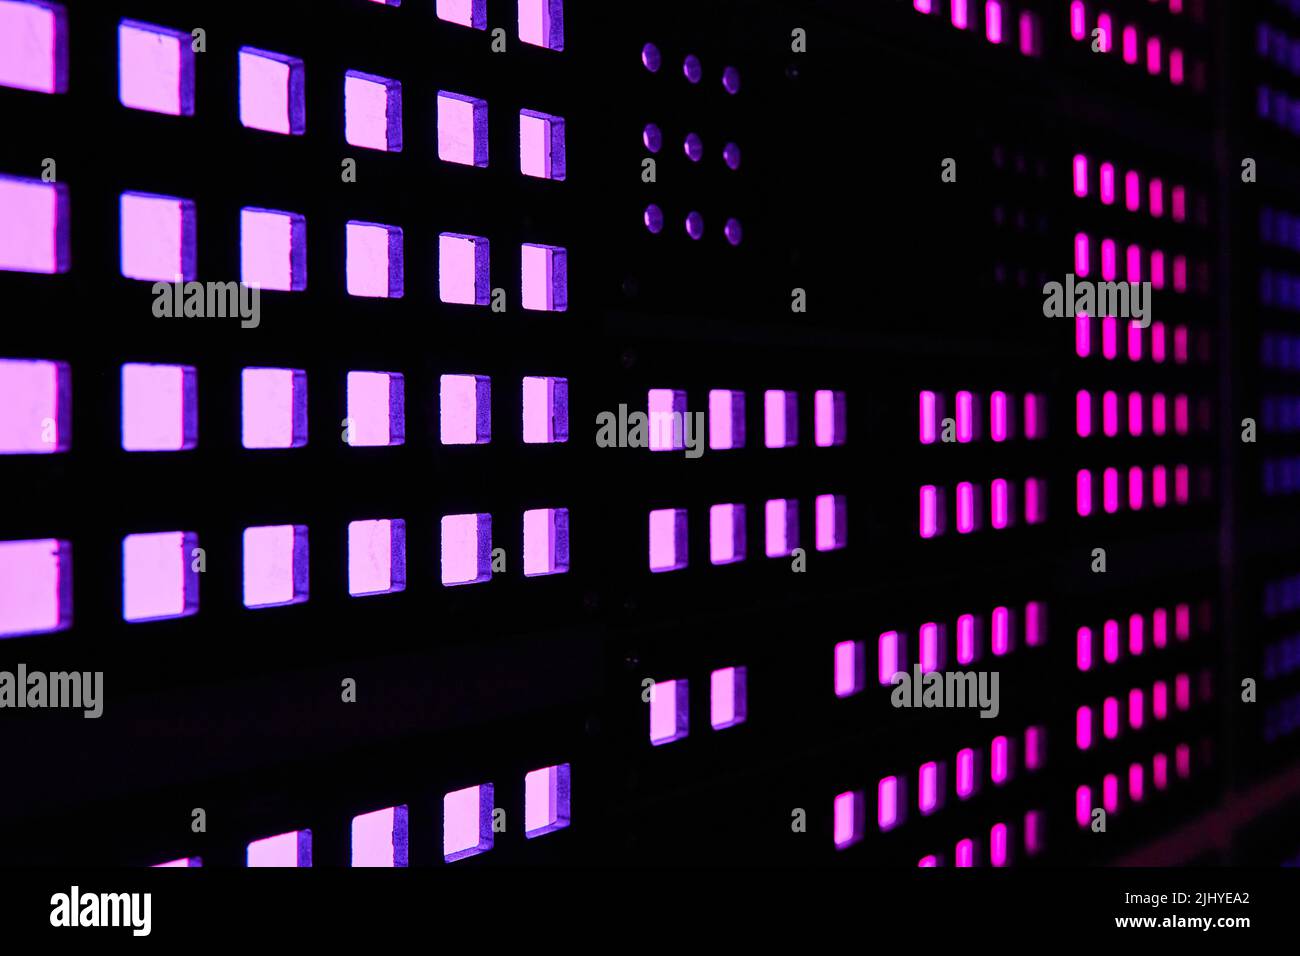 Wall of purple square lights on computer Stock Photo